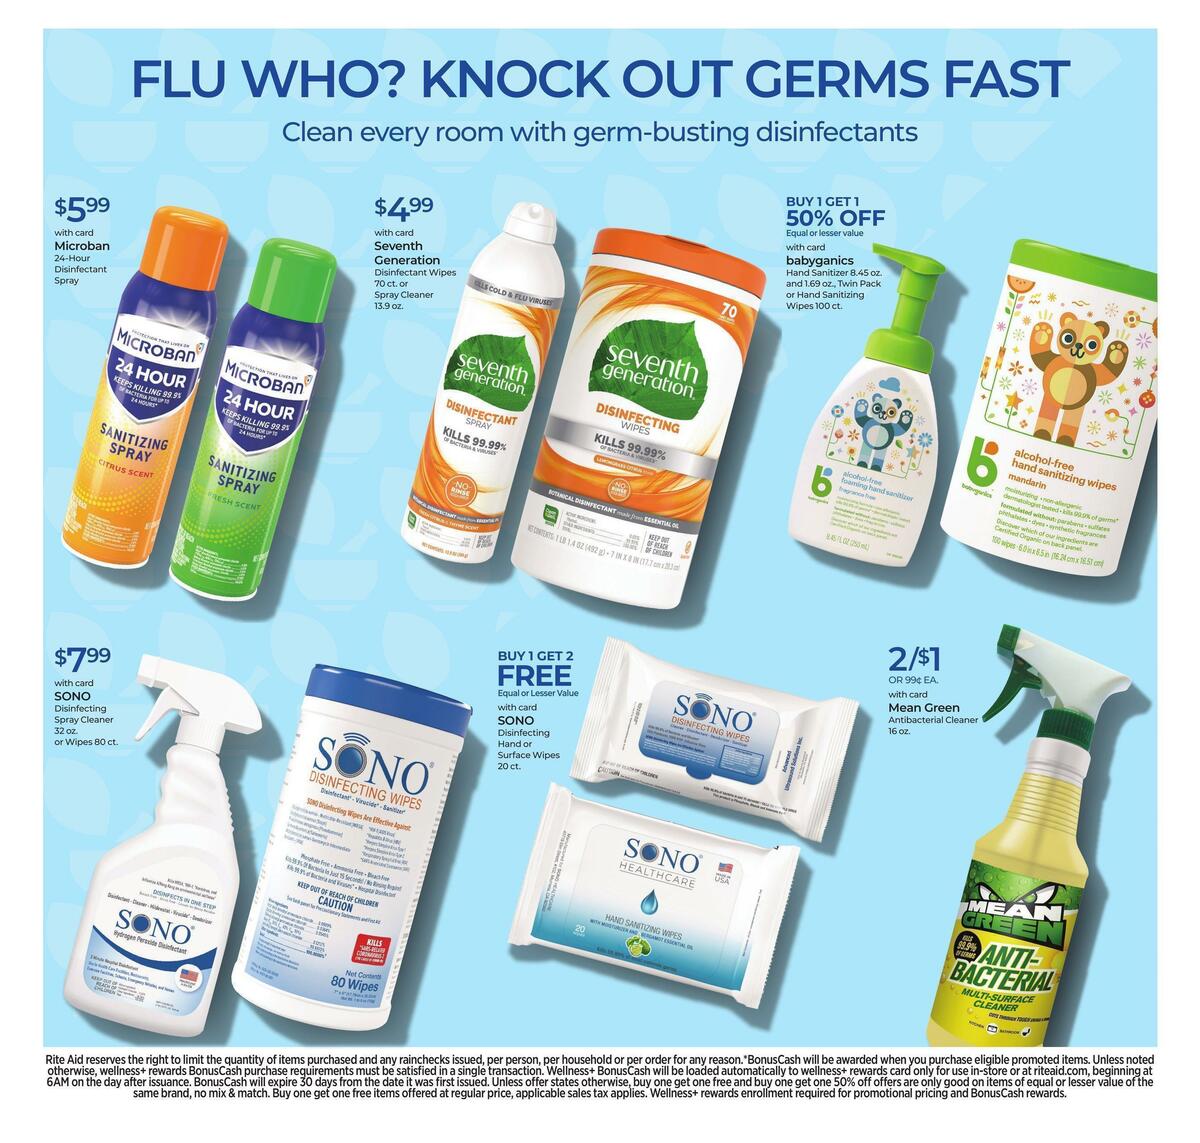 Rite Aid Weekly Ad from November 7